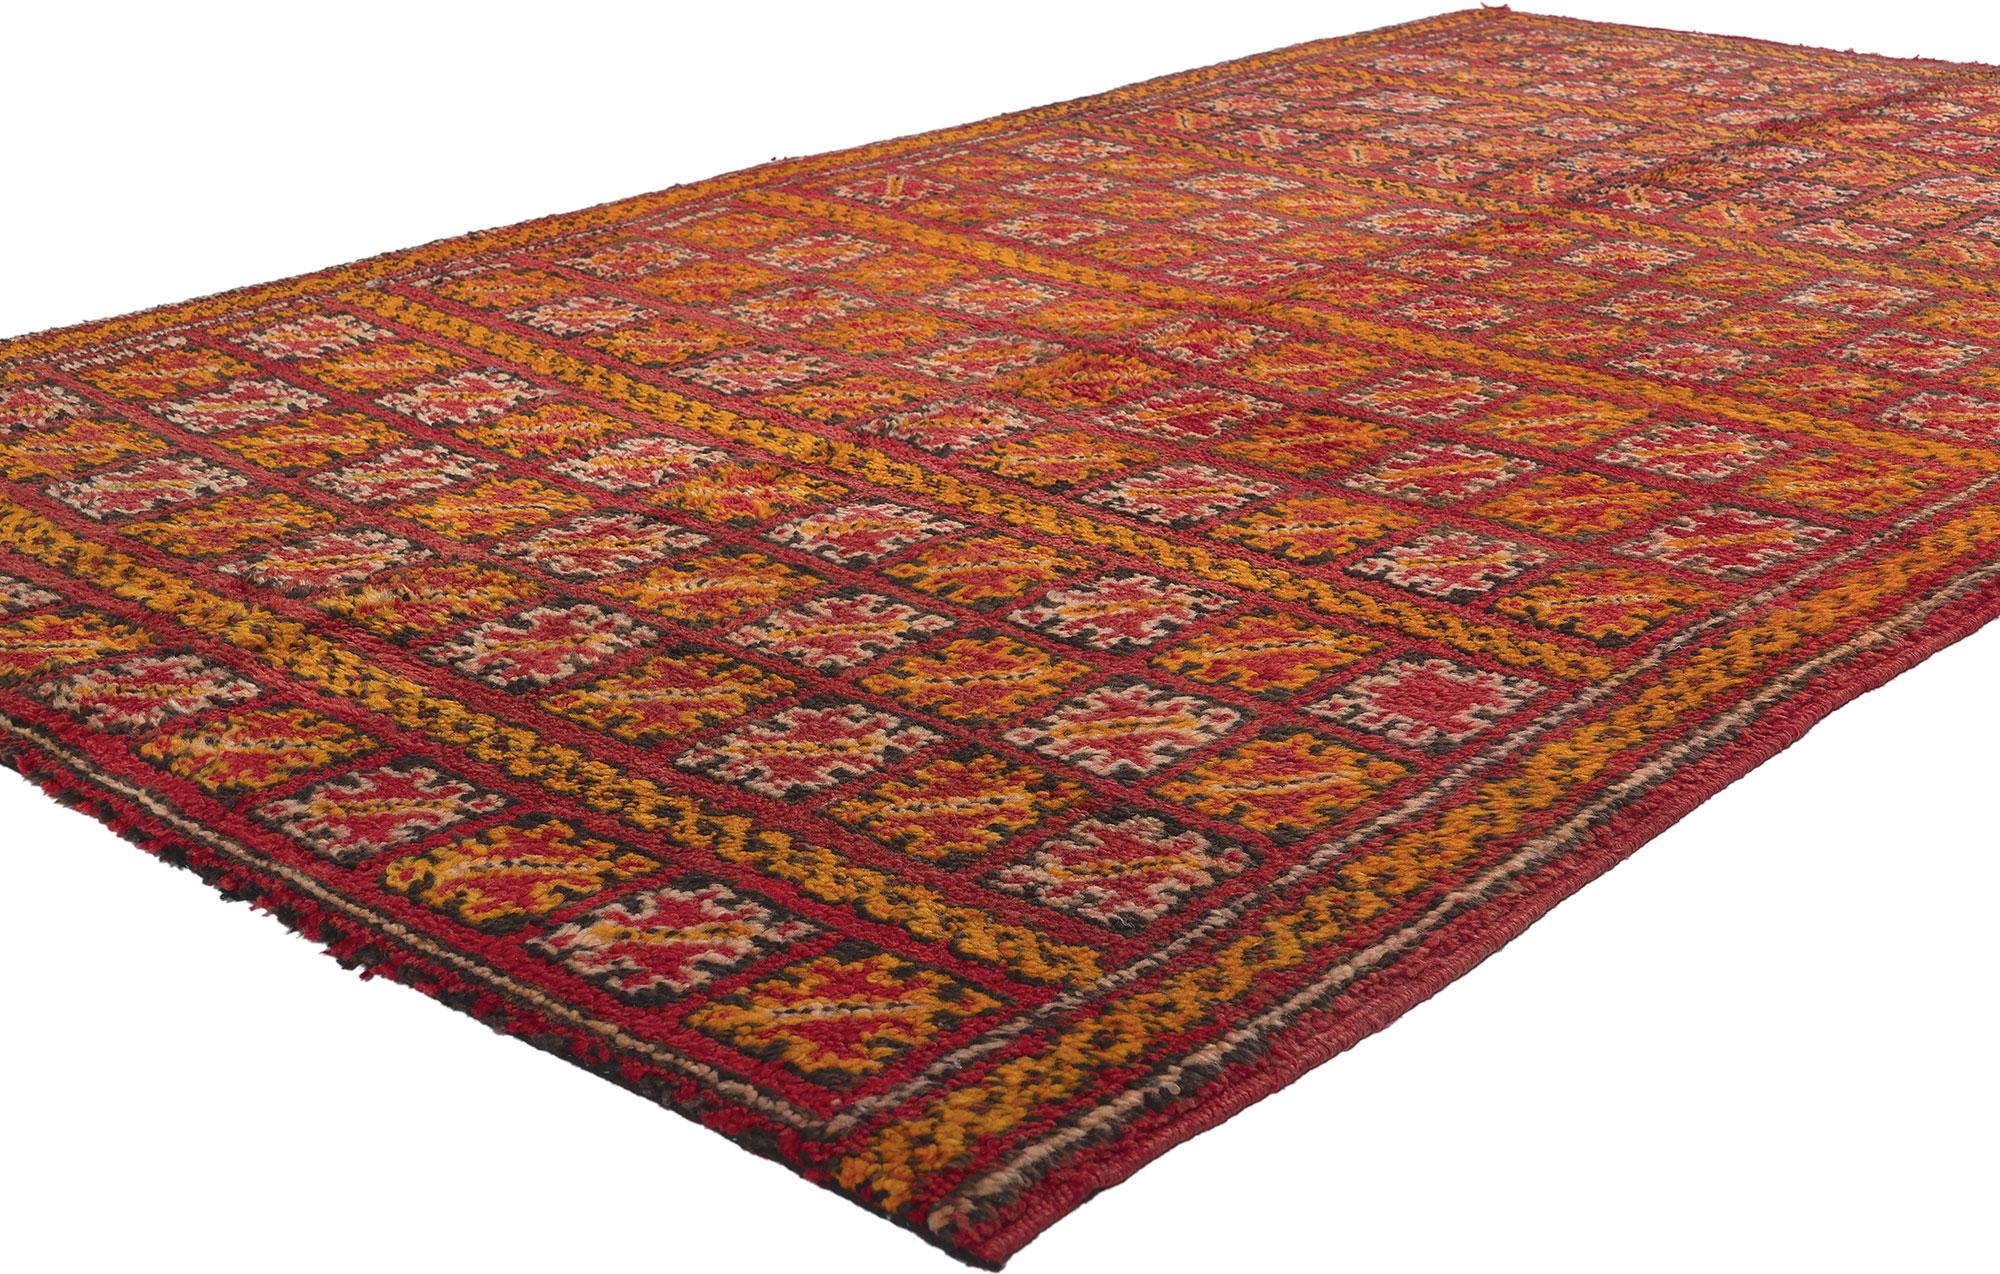 21483 Vintage Red Beni MGuild Moroccan Rug, 04'08 x 07'08. Embark on a vibrant visual odyssey through the rich history of Moroccan culture with our hand-knotted Beni MGuild vintage rug—a dazzling masterpiece that seamlessly melds hues, patterns, and